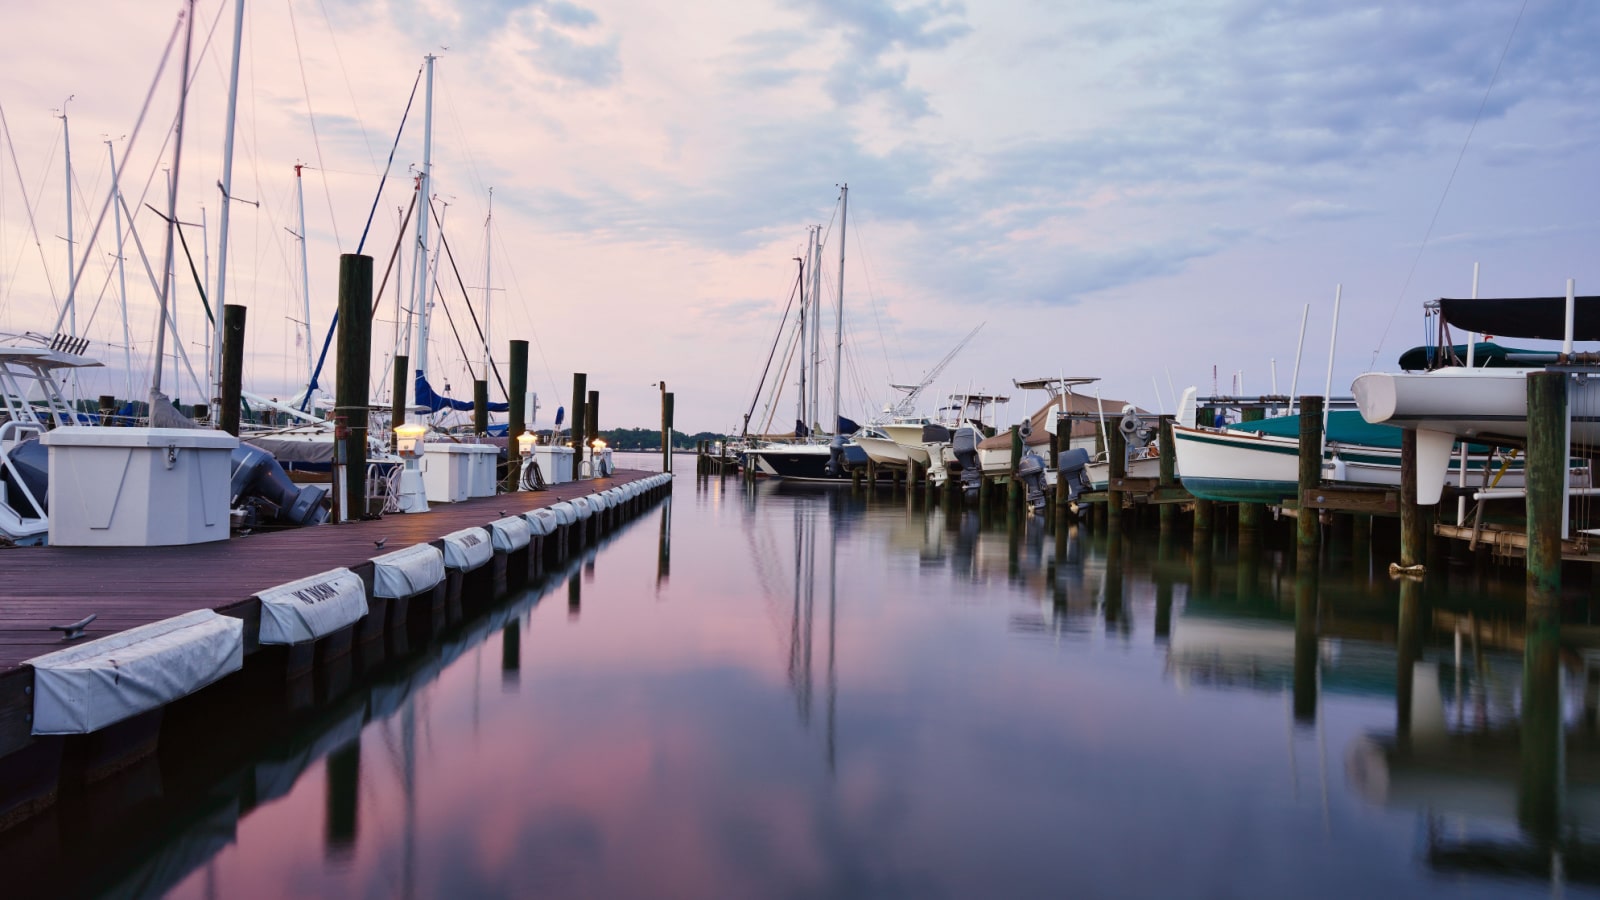 Boats in the marina at sunset. A sky in pastels over Annapolis on the Chesapeake Bay in the state of Maryland, USA.